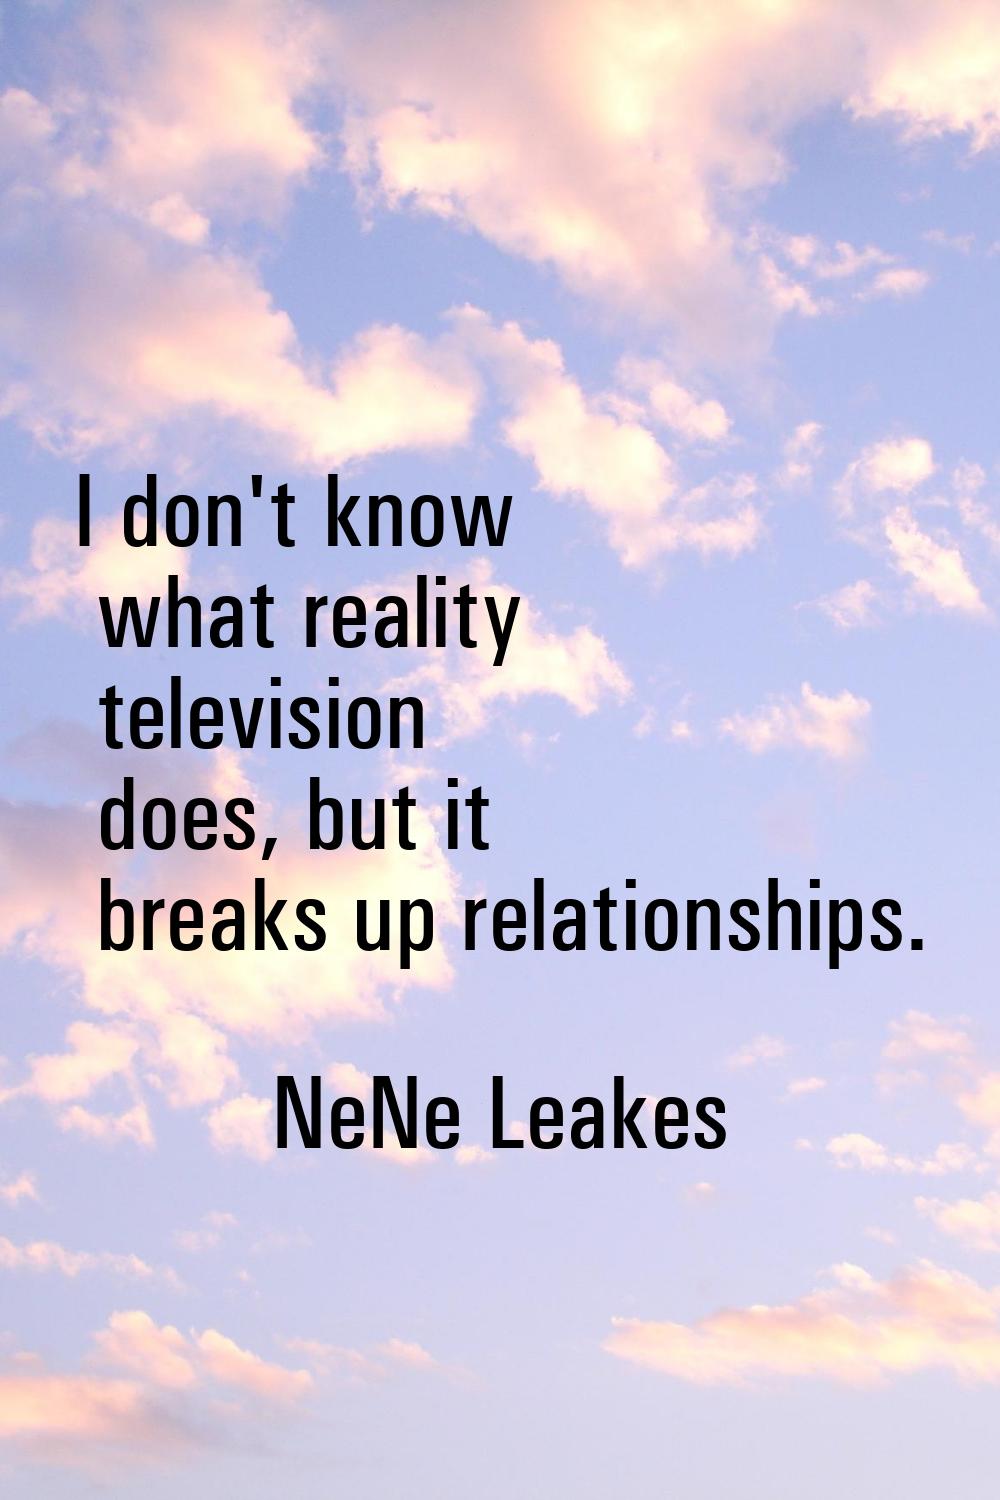 I don't know what reality television does, but it breaks up relationships.